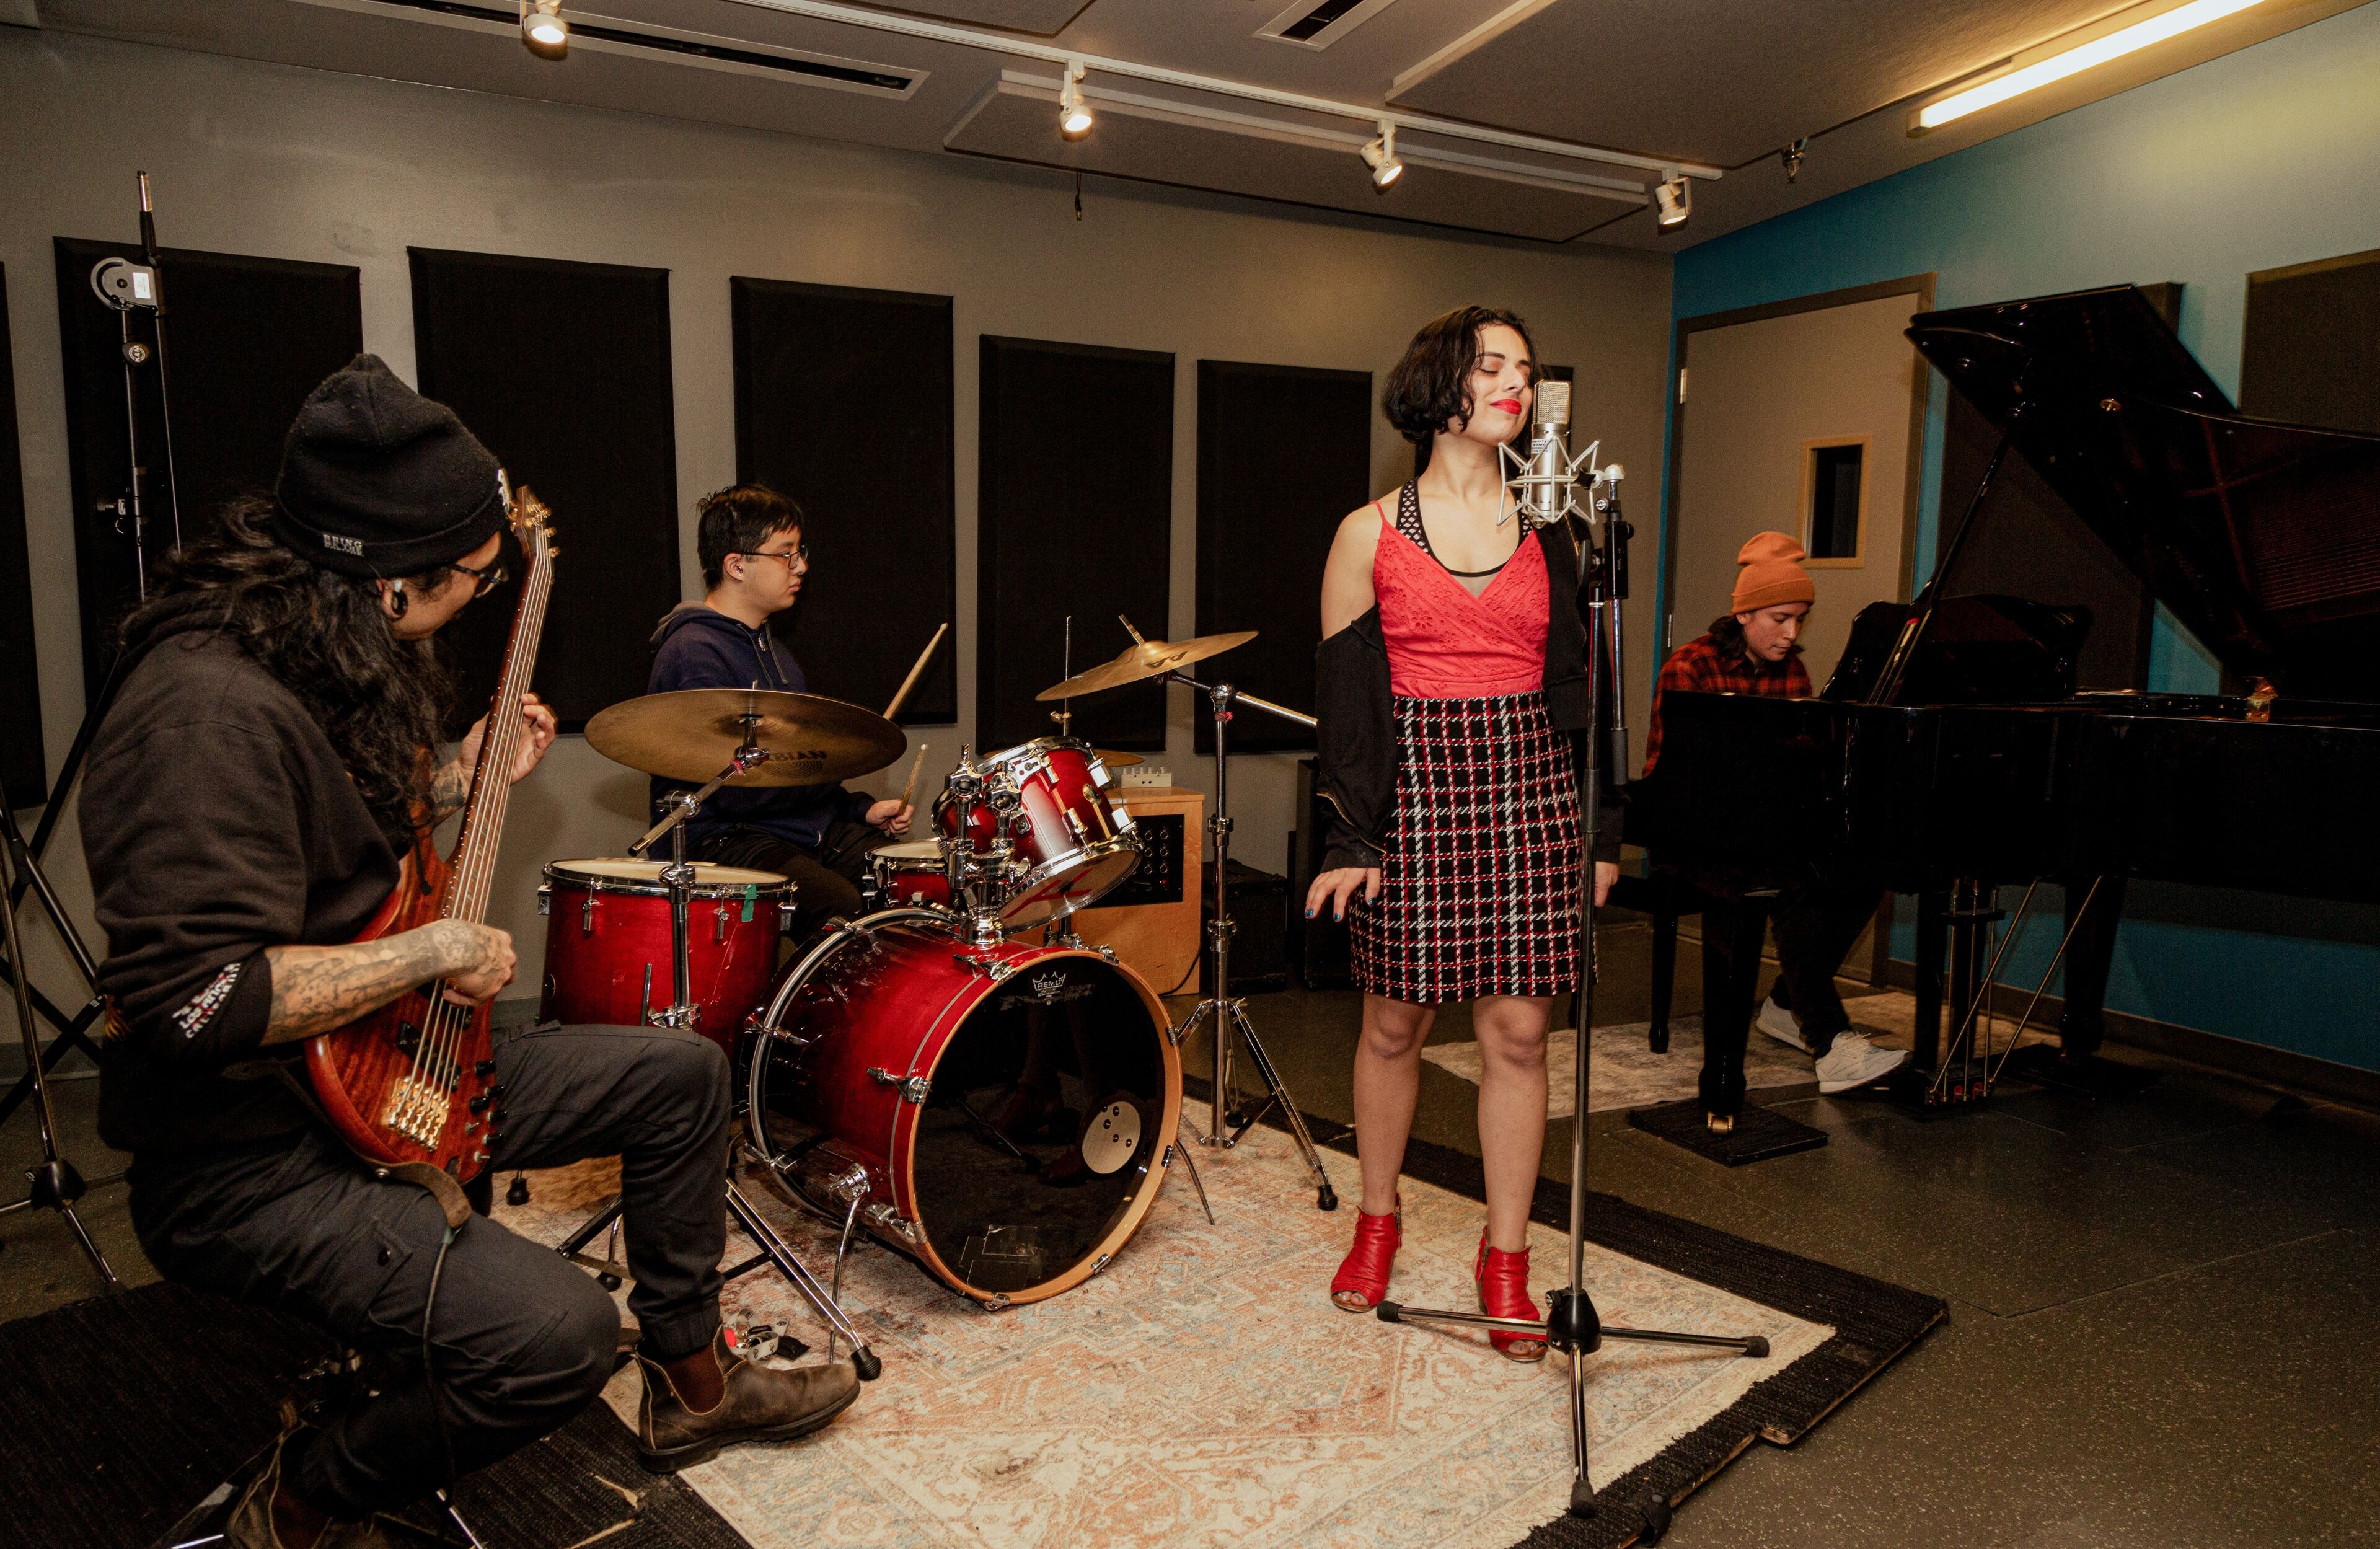 A band with vocalist, drummer, bassist, and pianist performing together in a studio.